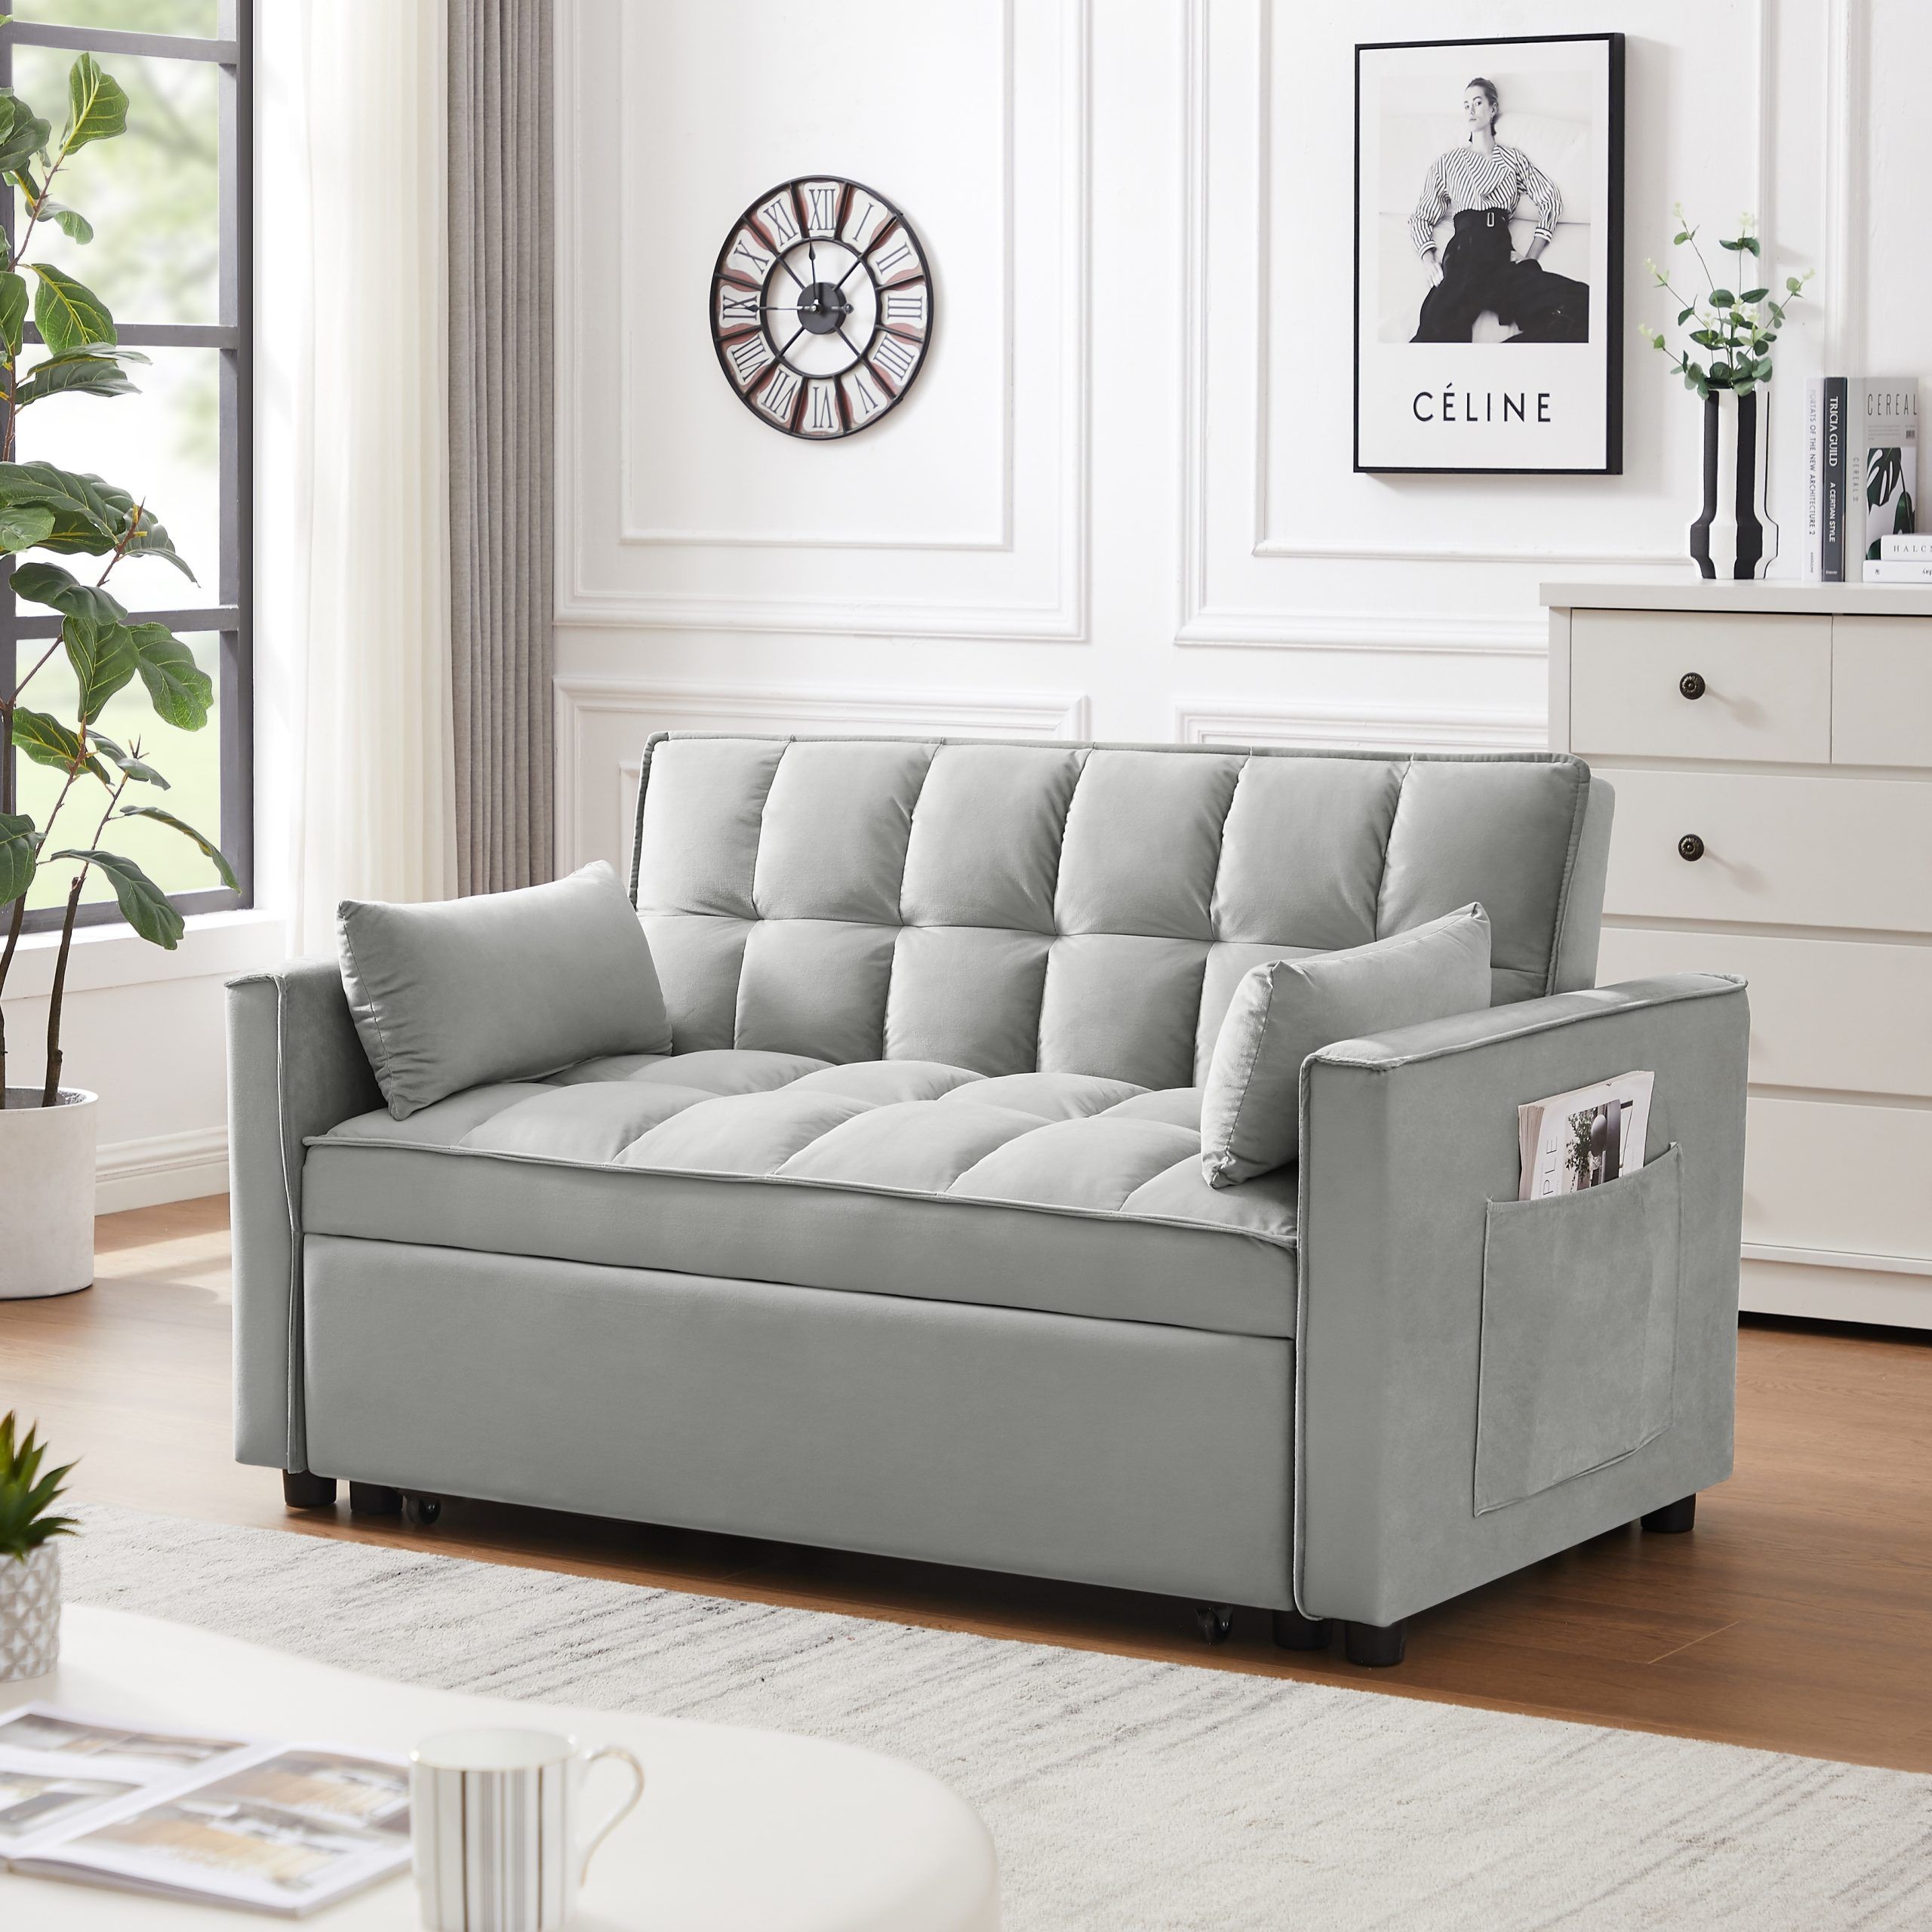 Velvet Loveseat Futon Sofa Pullout Bed, 3 In 1 Convertible Sleeper Sofa Bed  – Bed Bath & Beyond – 38908553 Within 3 In 1 Gray Pull Out Sleeper Sofas (View 2 of 15)